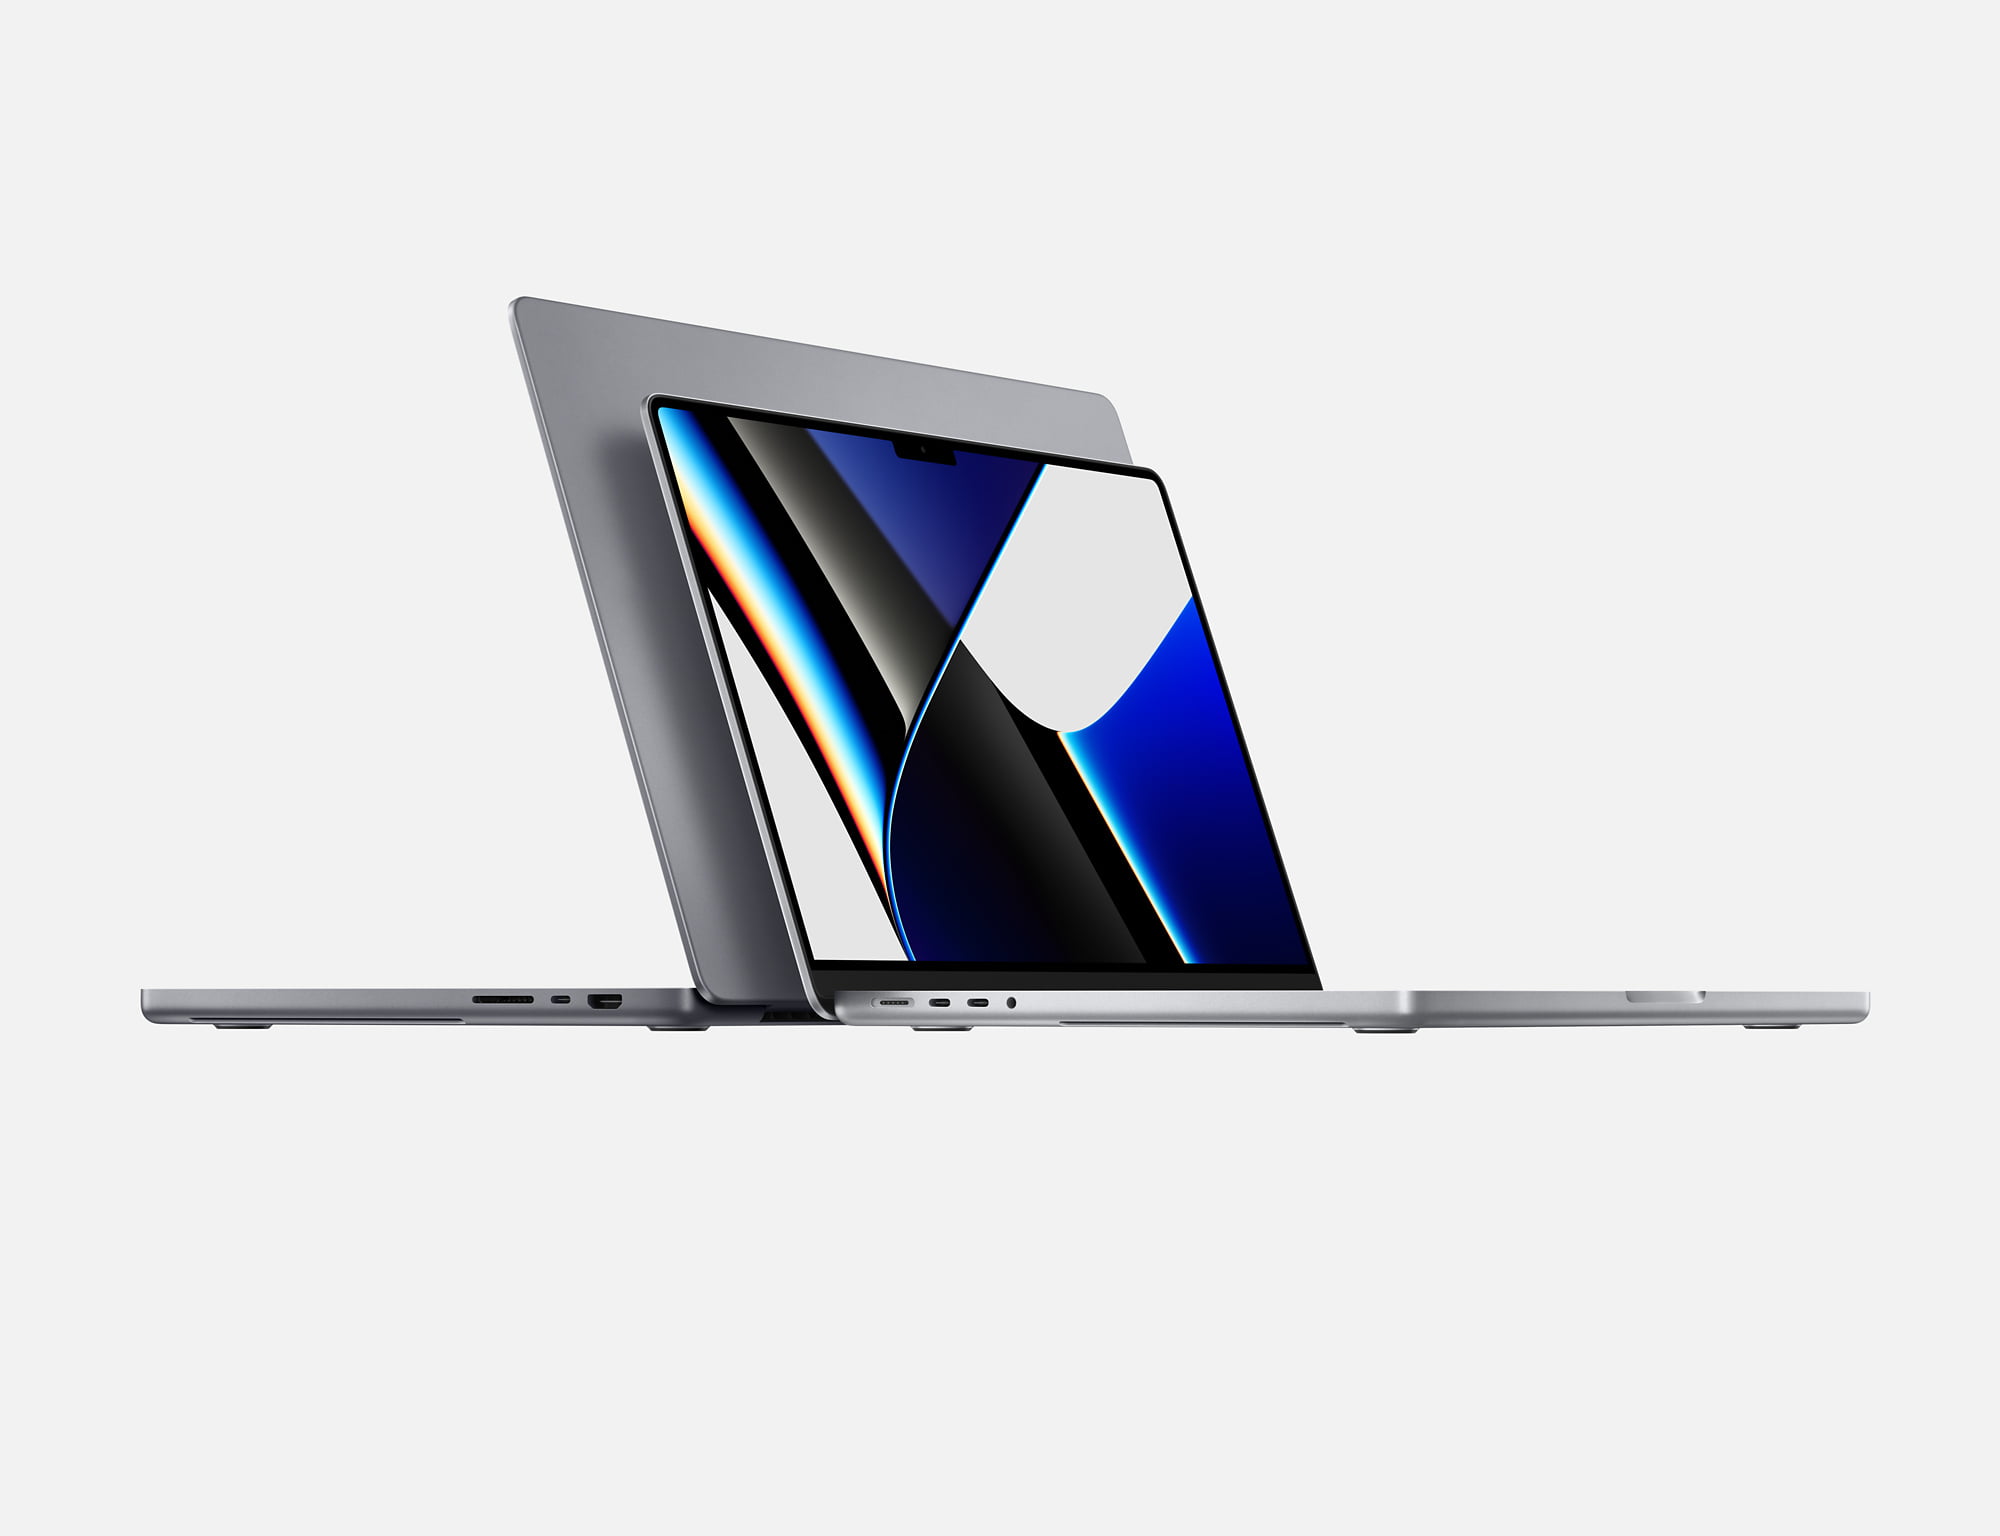 Apple MacBook Pro (14-inch, Apple M1 Pro chip with 8-core CPU and 14-core  GPU, 16GB RAM, 512GB SSD) - Space Gray